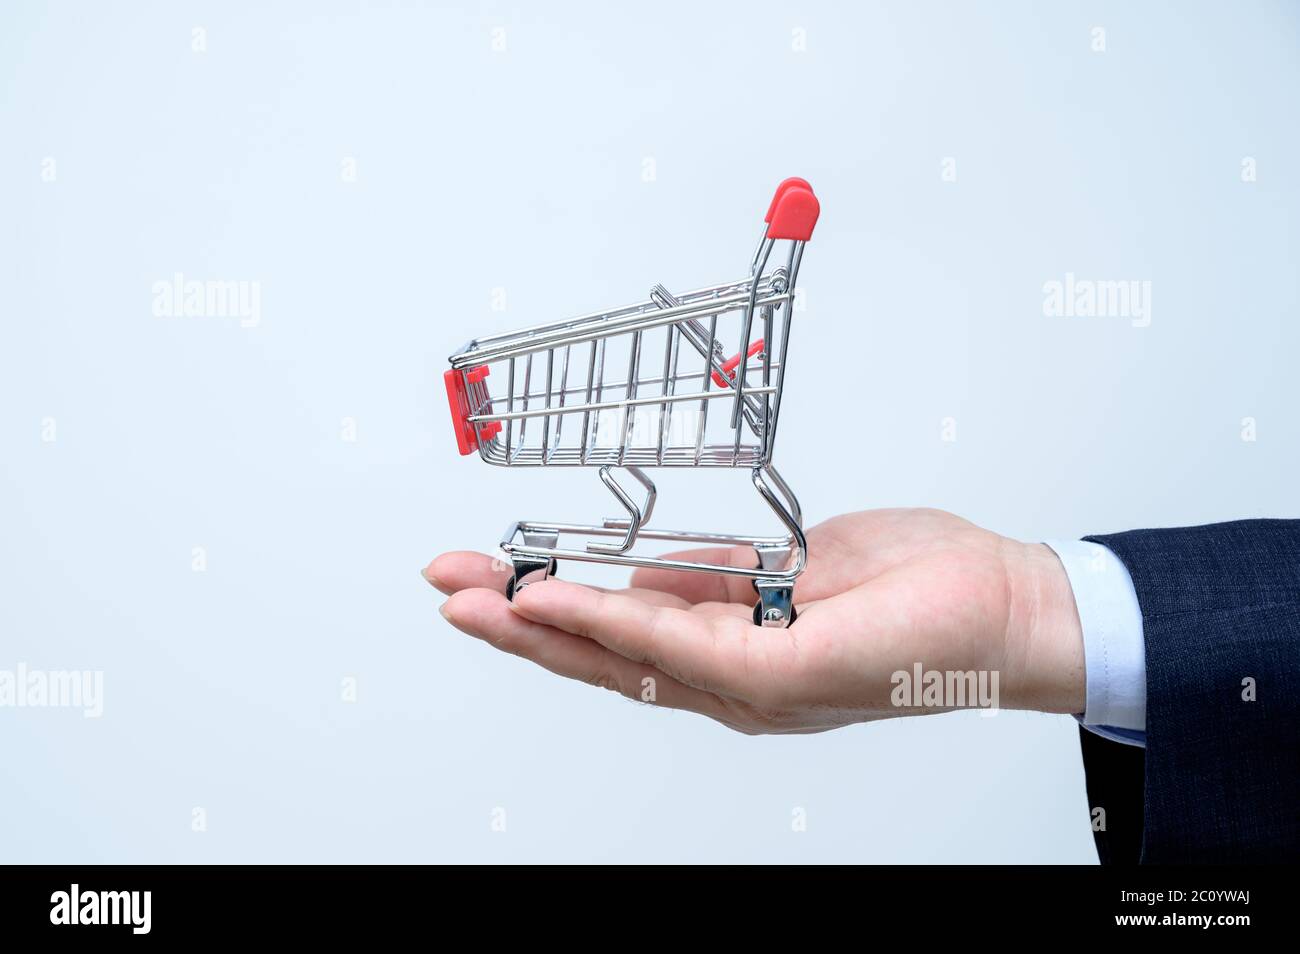 Man in suit holding small shopping trolley in hand. Close up. Business, commerce and shopping concept. Stock Photo